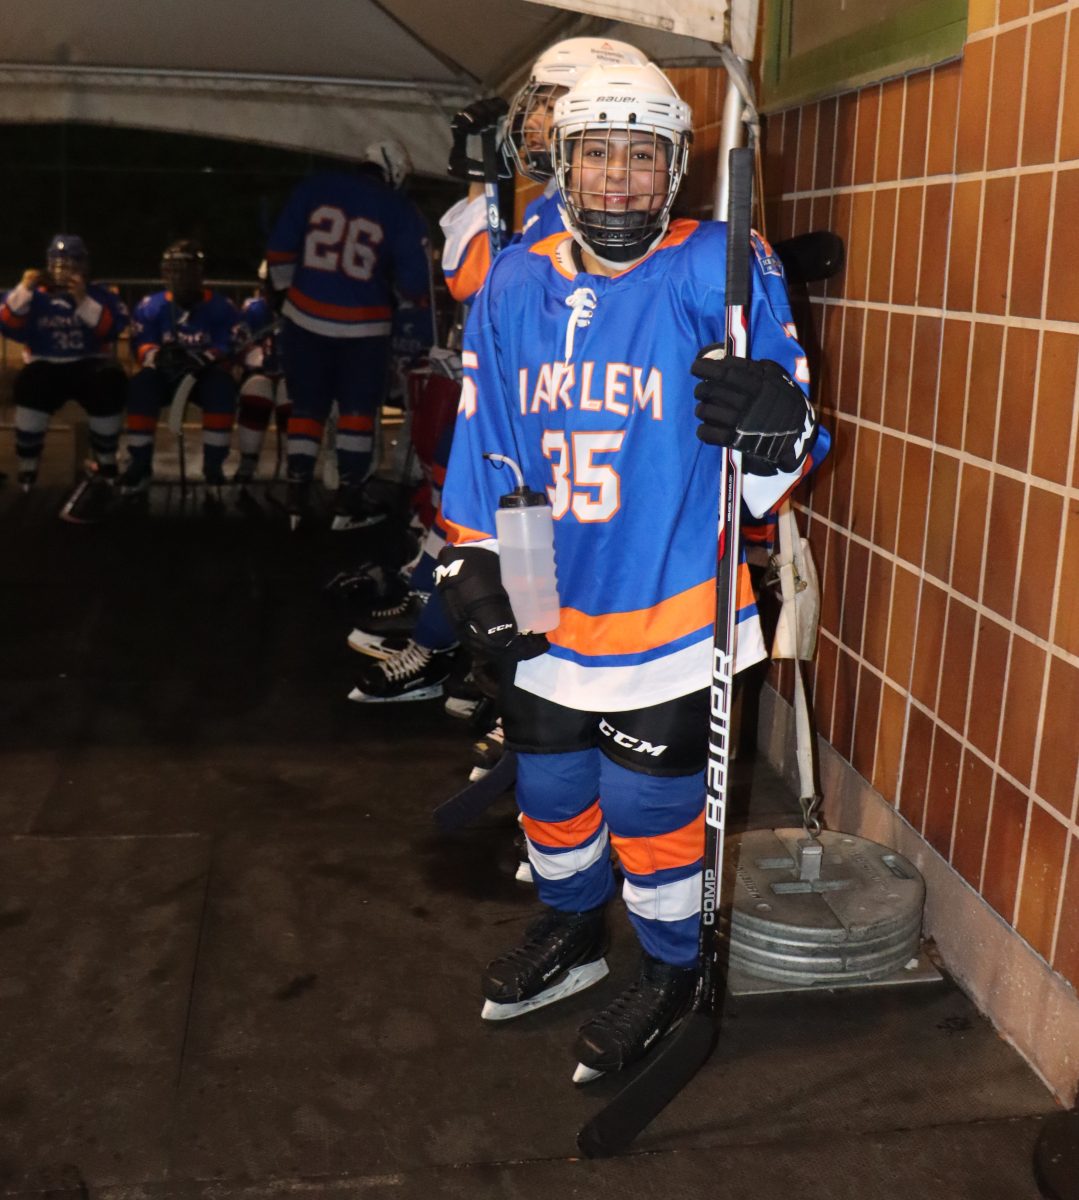 Martinez prepares to take the ice at the 16th Annual Invitational Lightning Tournament at Riverbank State Park on Mar. 6.